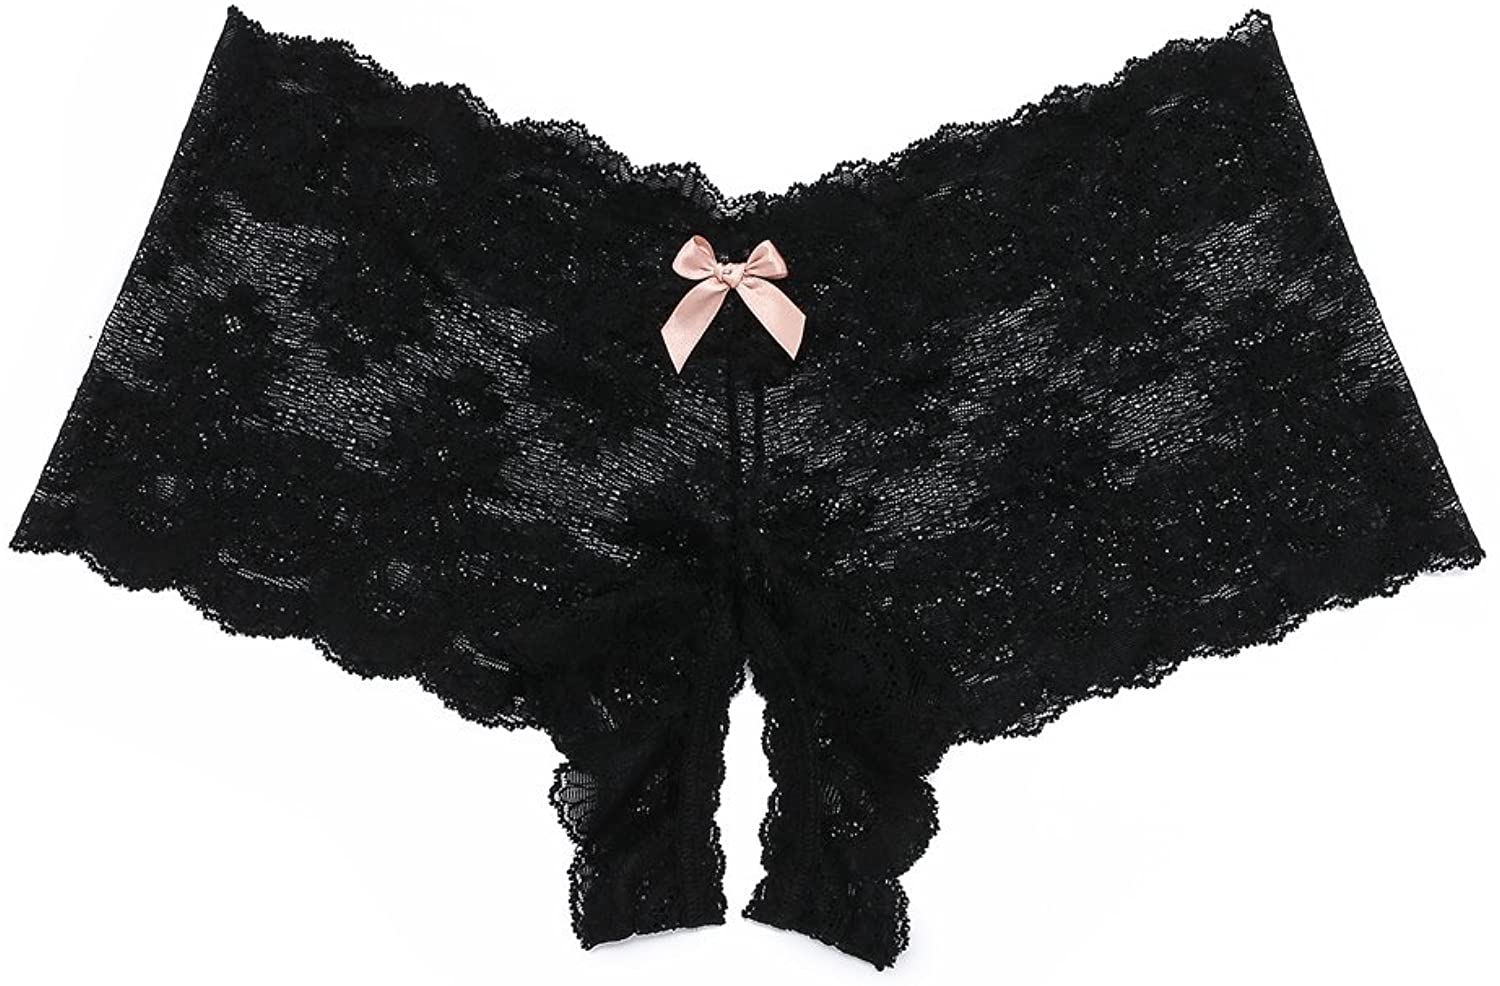 Luxe Lace Crotchless Brief In Black, Hanky Panky